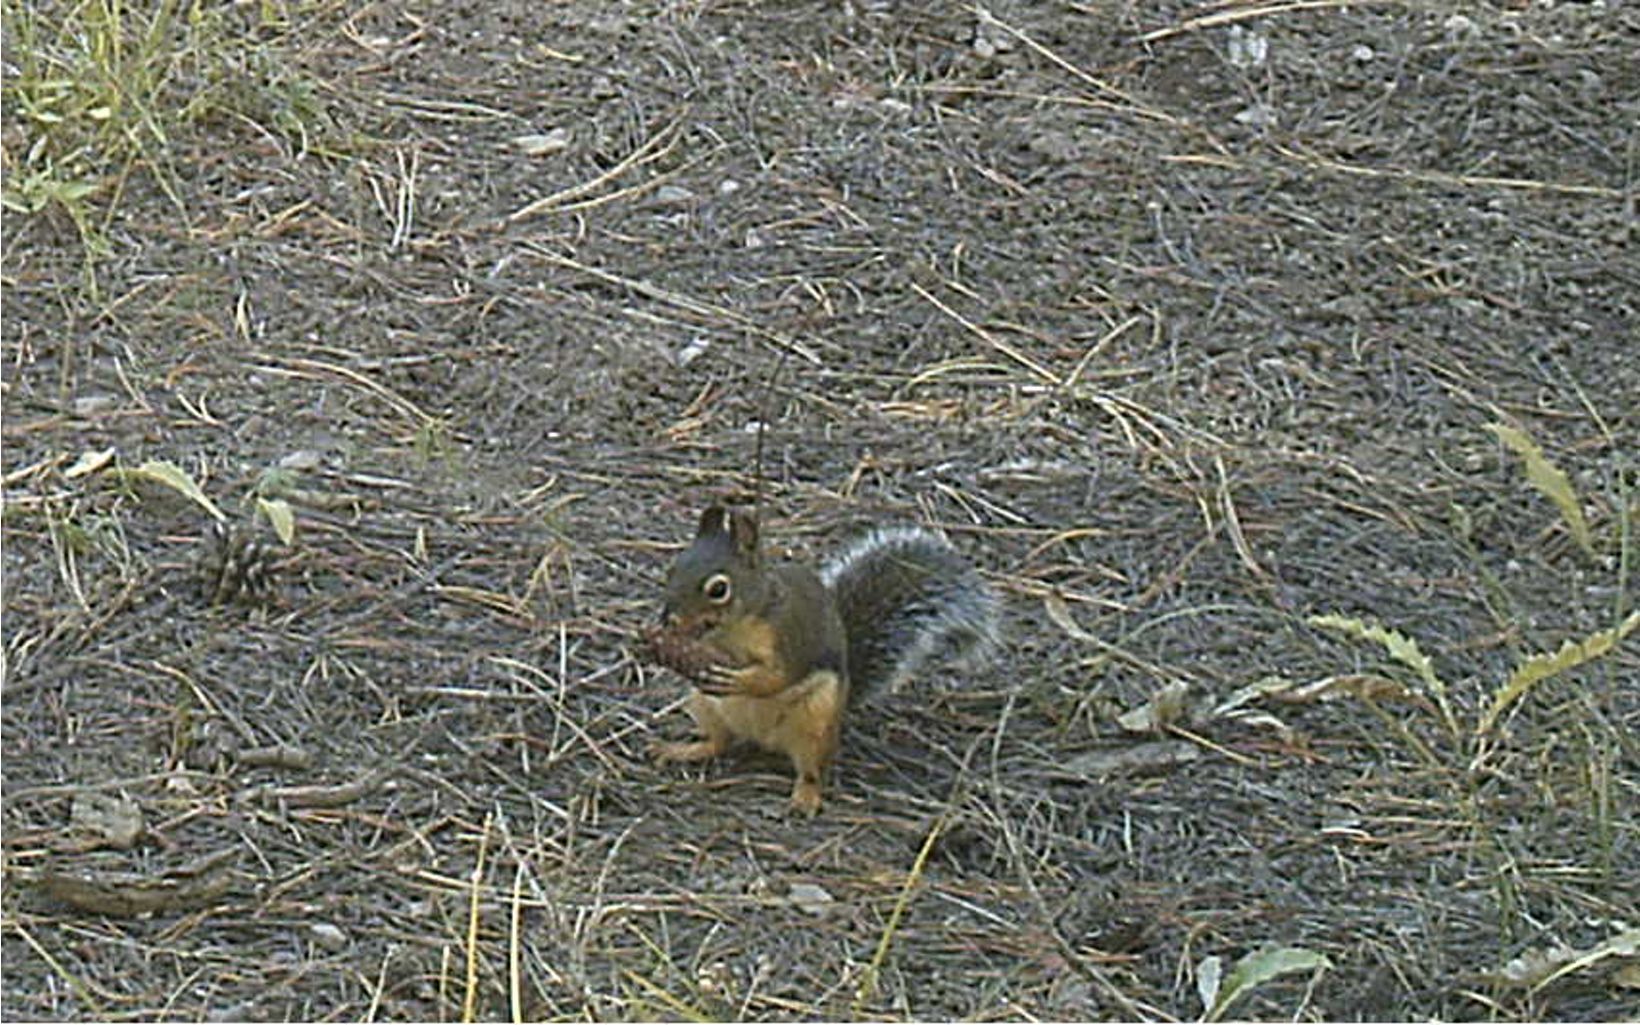 Footage from the Carpenter Valley Wildlife Cameras